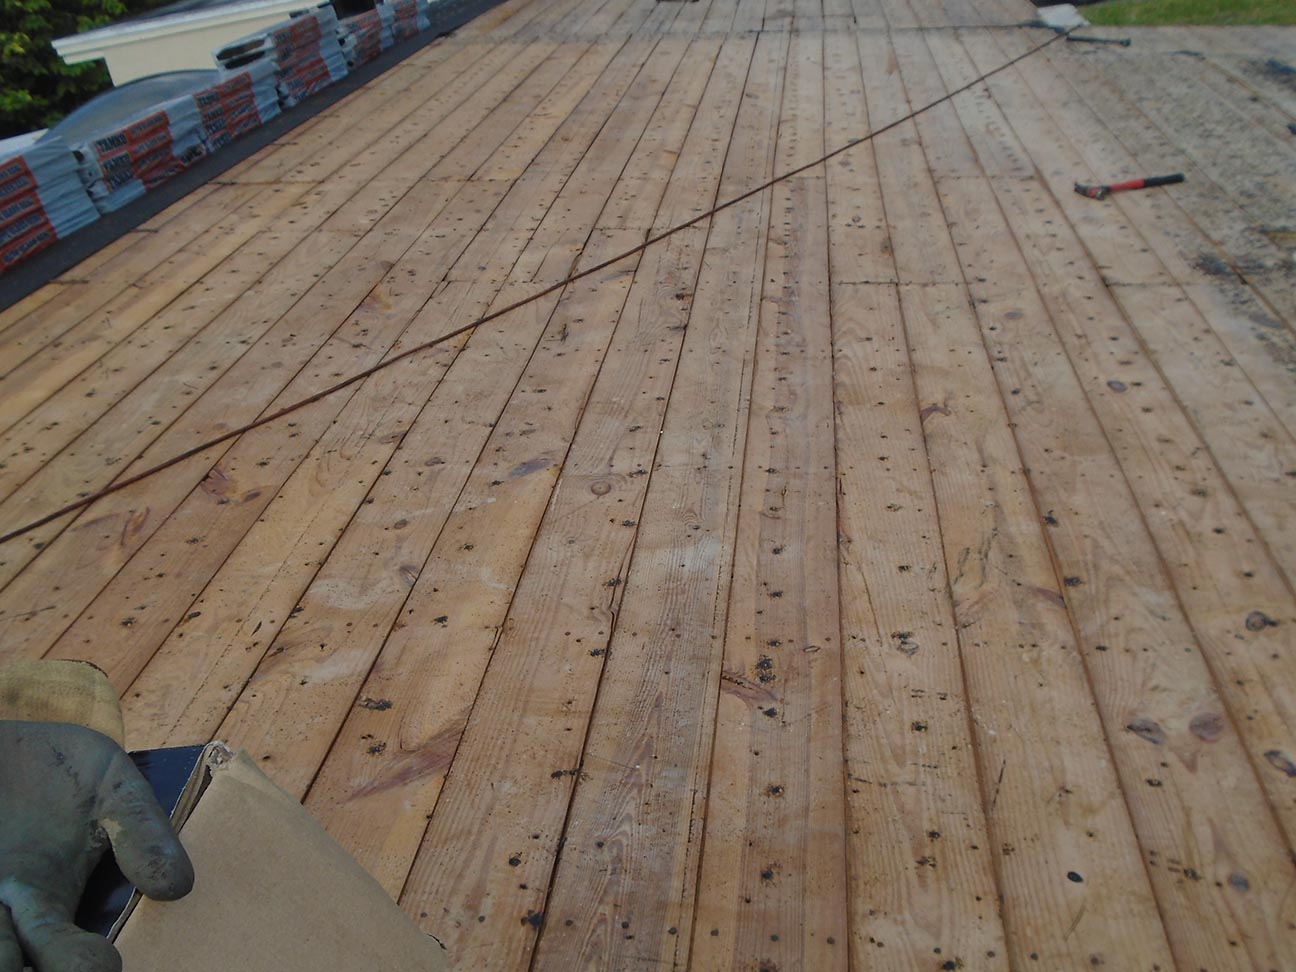 Exposed decking after removal of existing roof